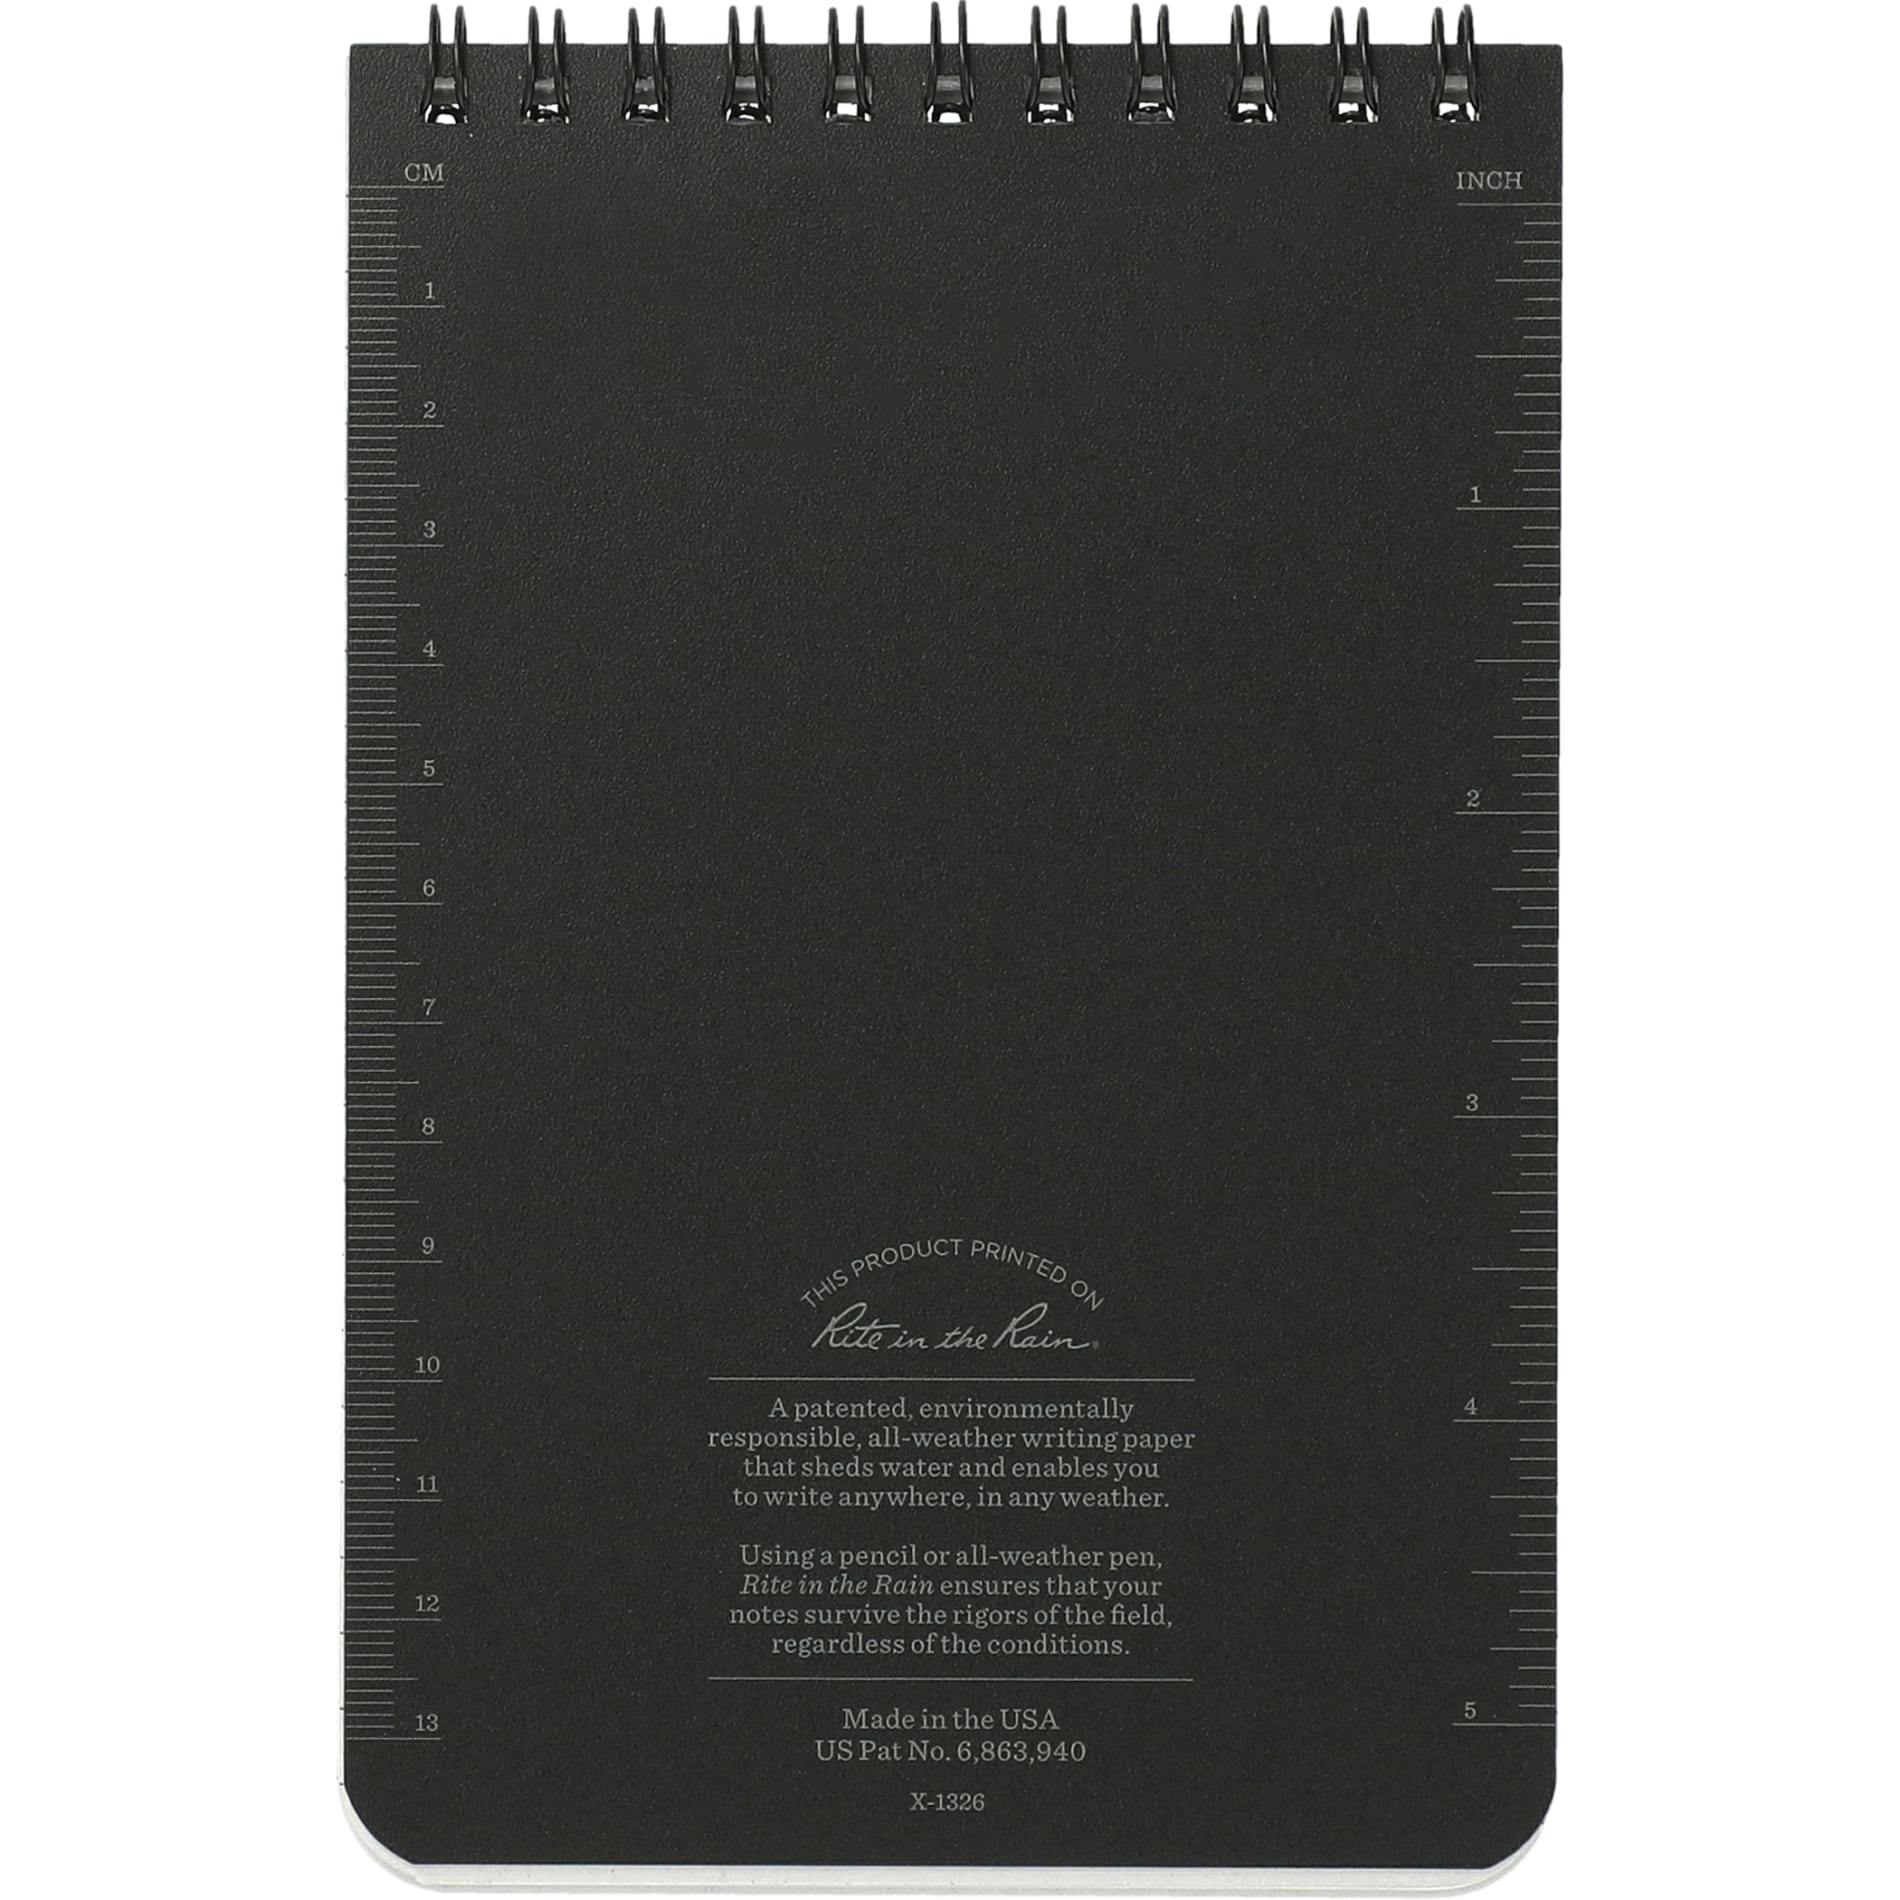 4” x 6” Rite in the Rain Top Spiral Notebook - additional Image 4